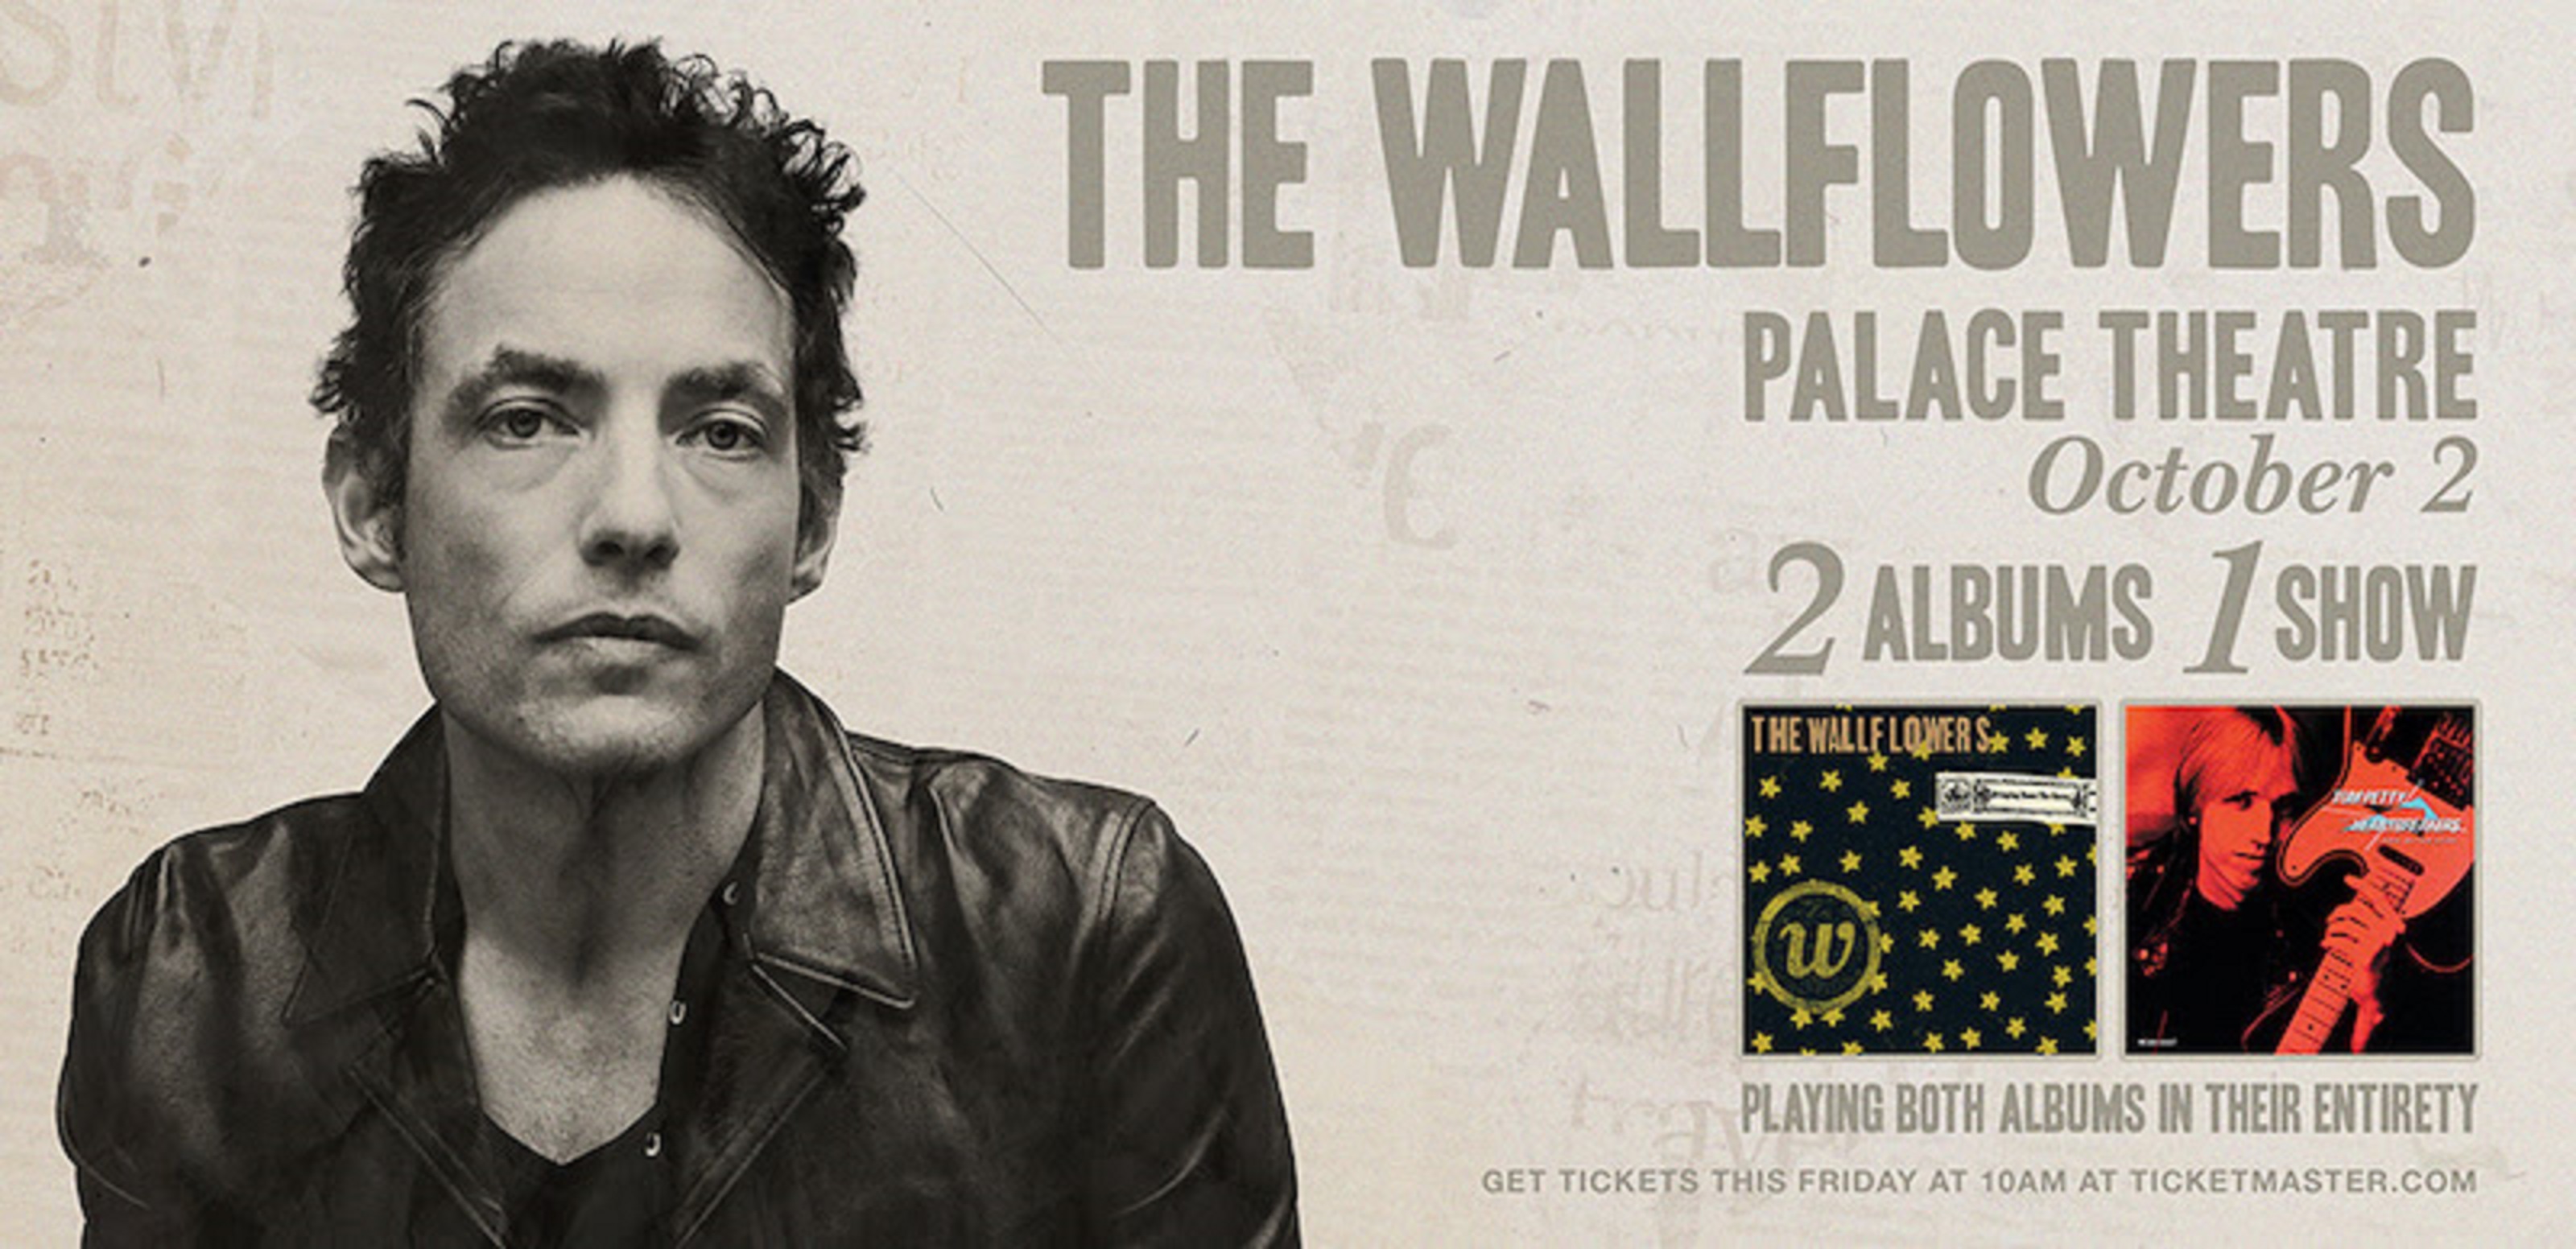 The Wallflowers To Perform "Bringing Down The Horse" In Its Entirety For The First Time - First Los Angeles Headline Show In Over A Decade